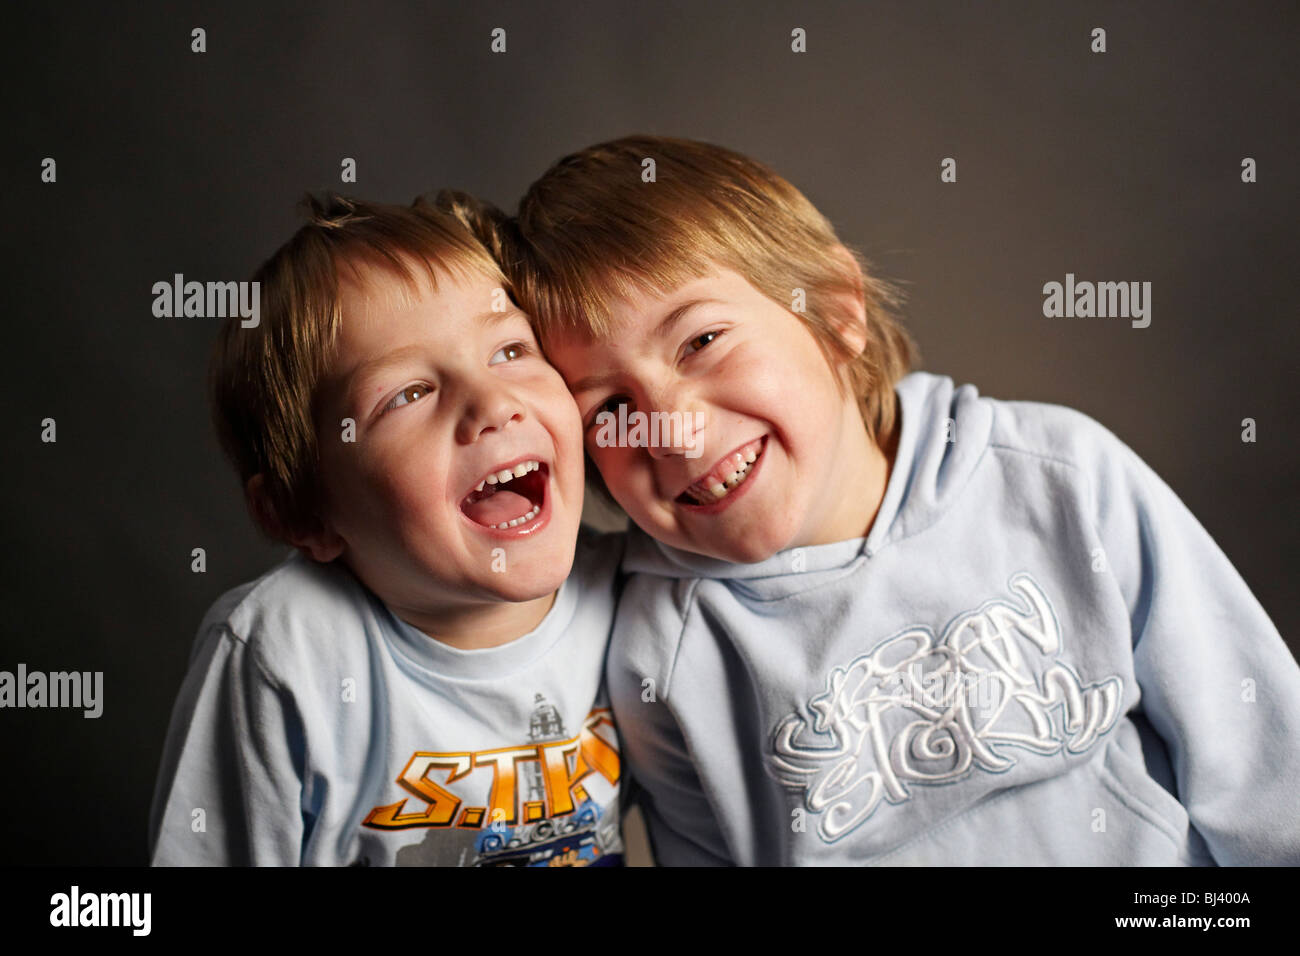 Two children, brothers Stock Photo